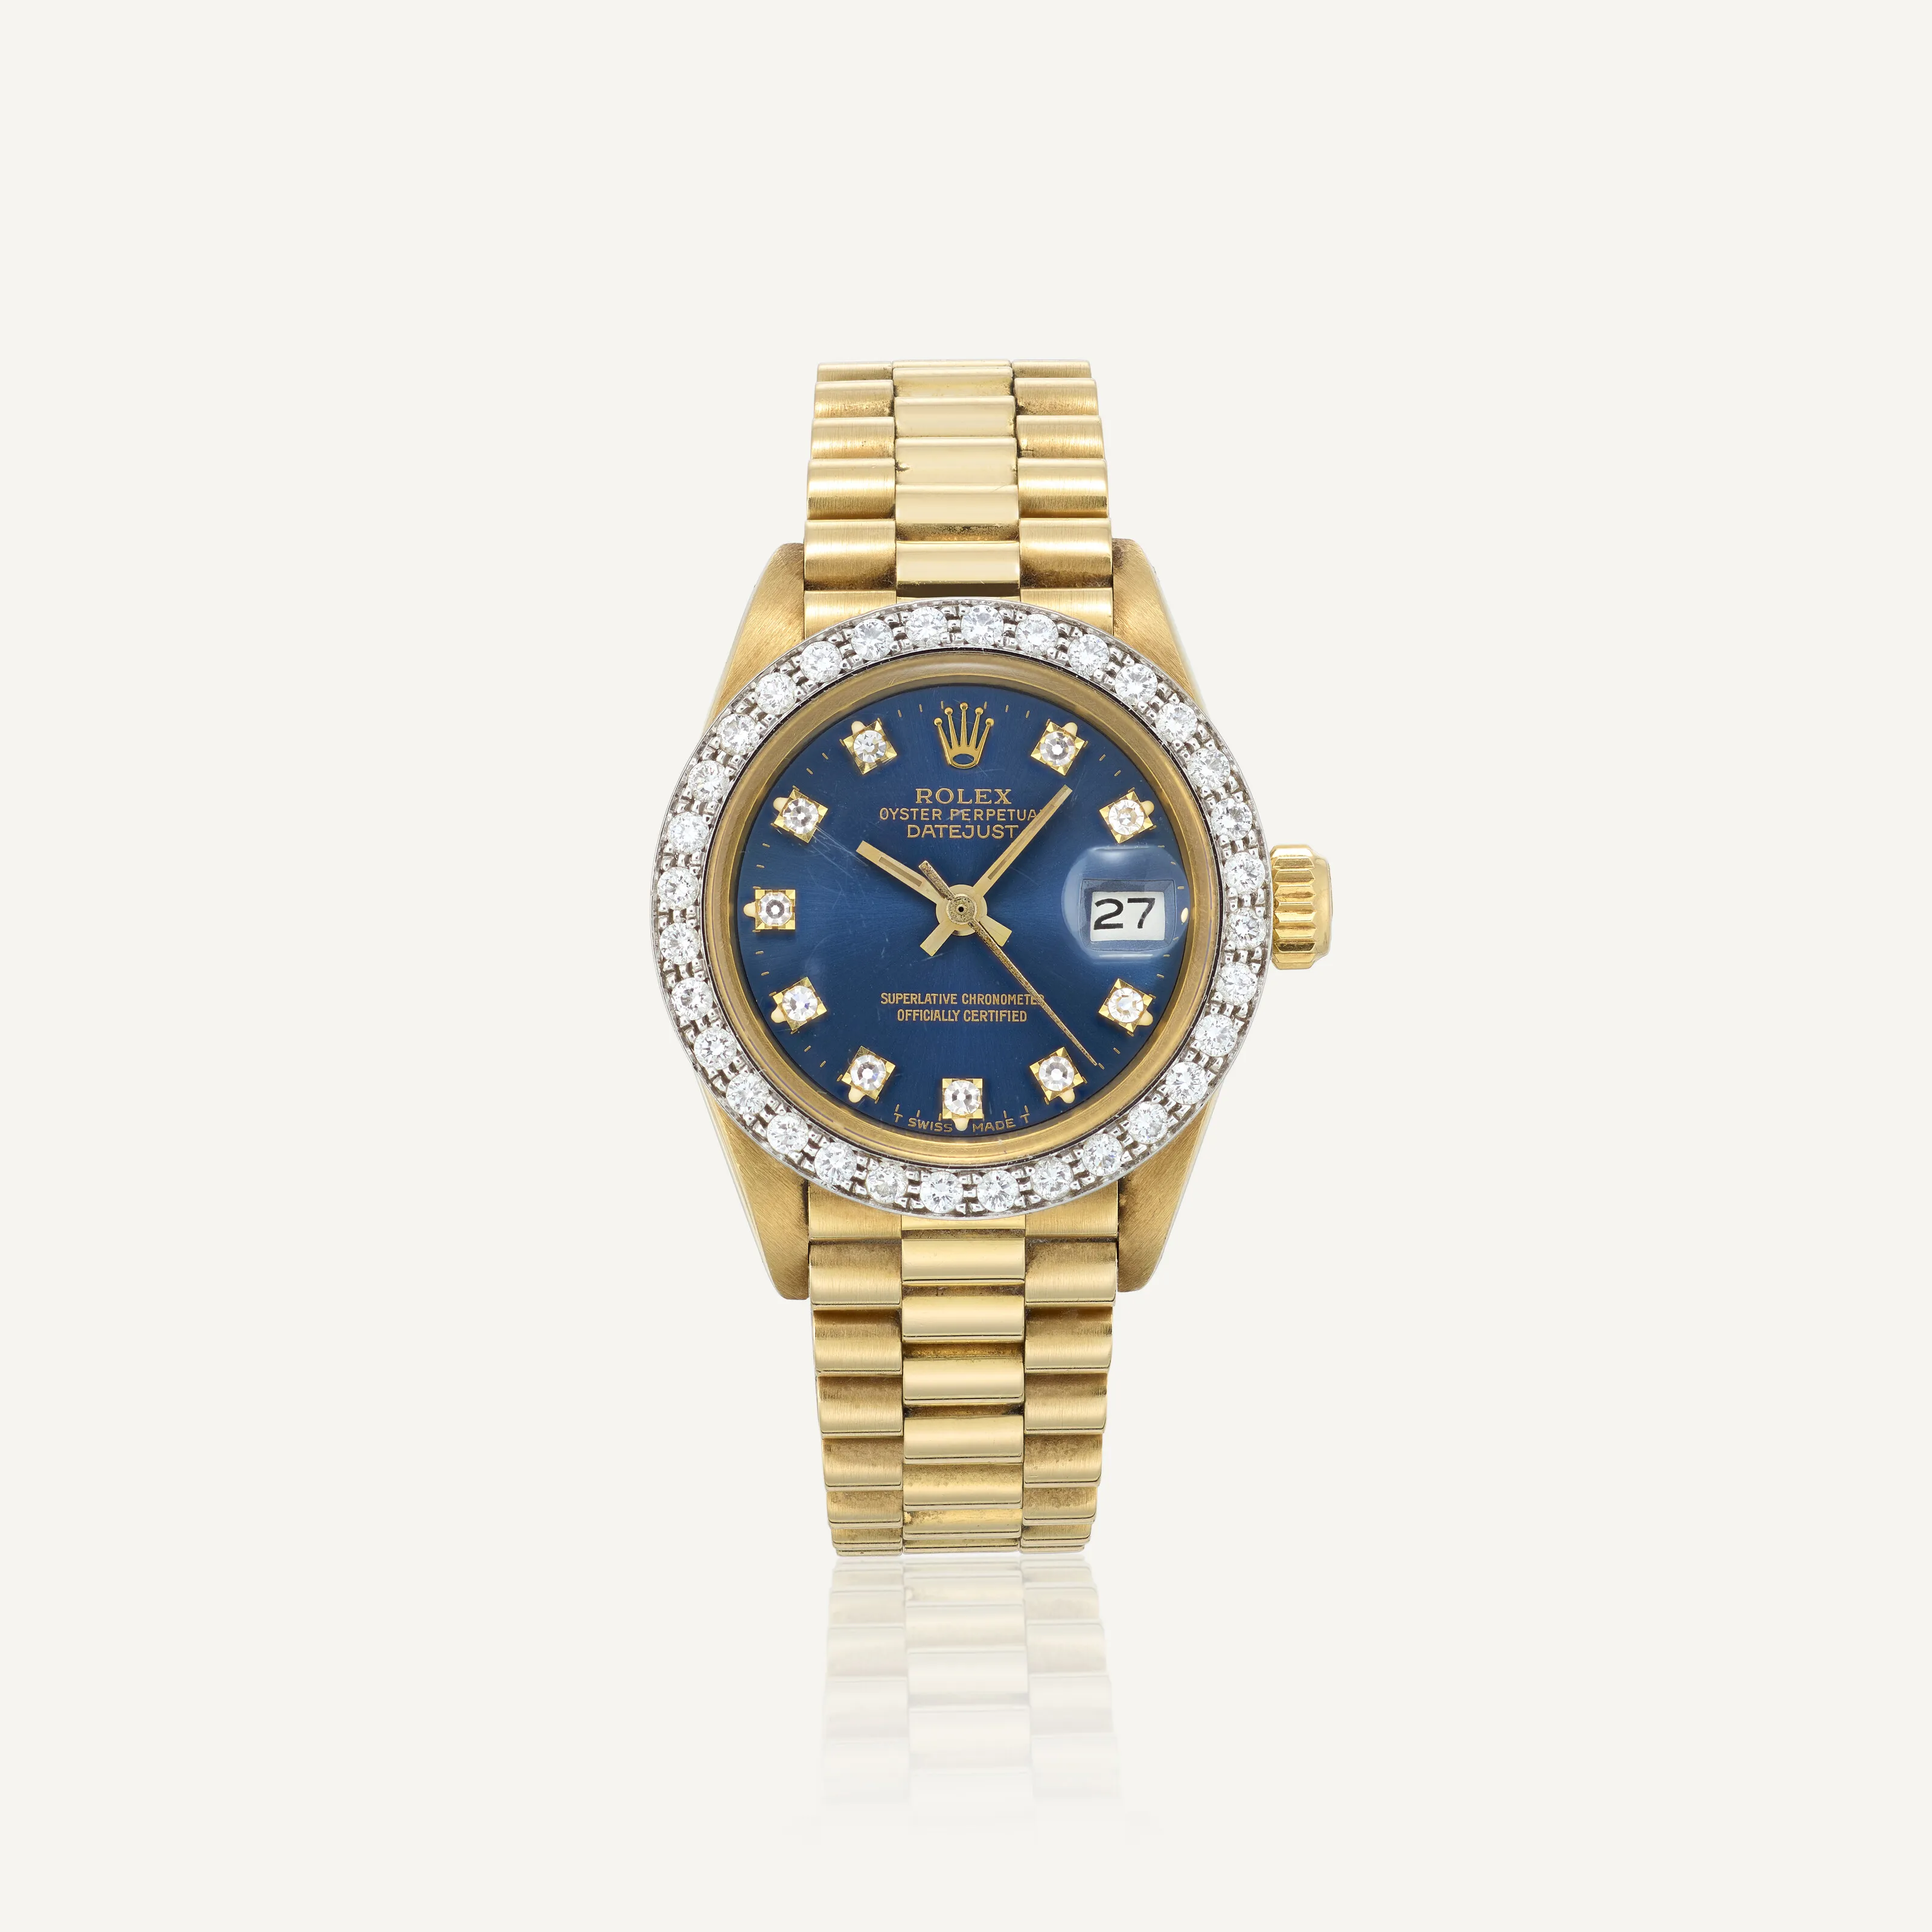 Rolex Oyster Perpetual "Datejust" 6917 26mm Yellow gold and diamond-set Blue